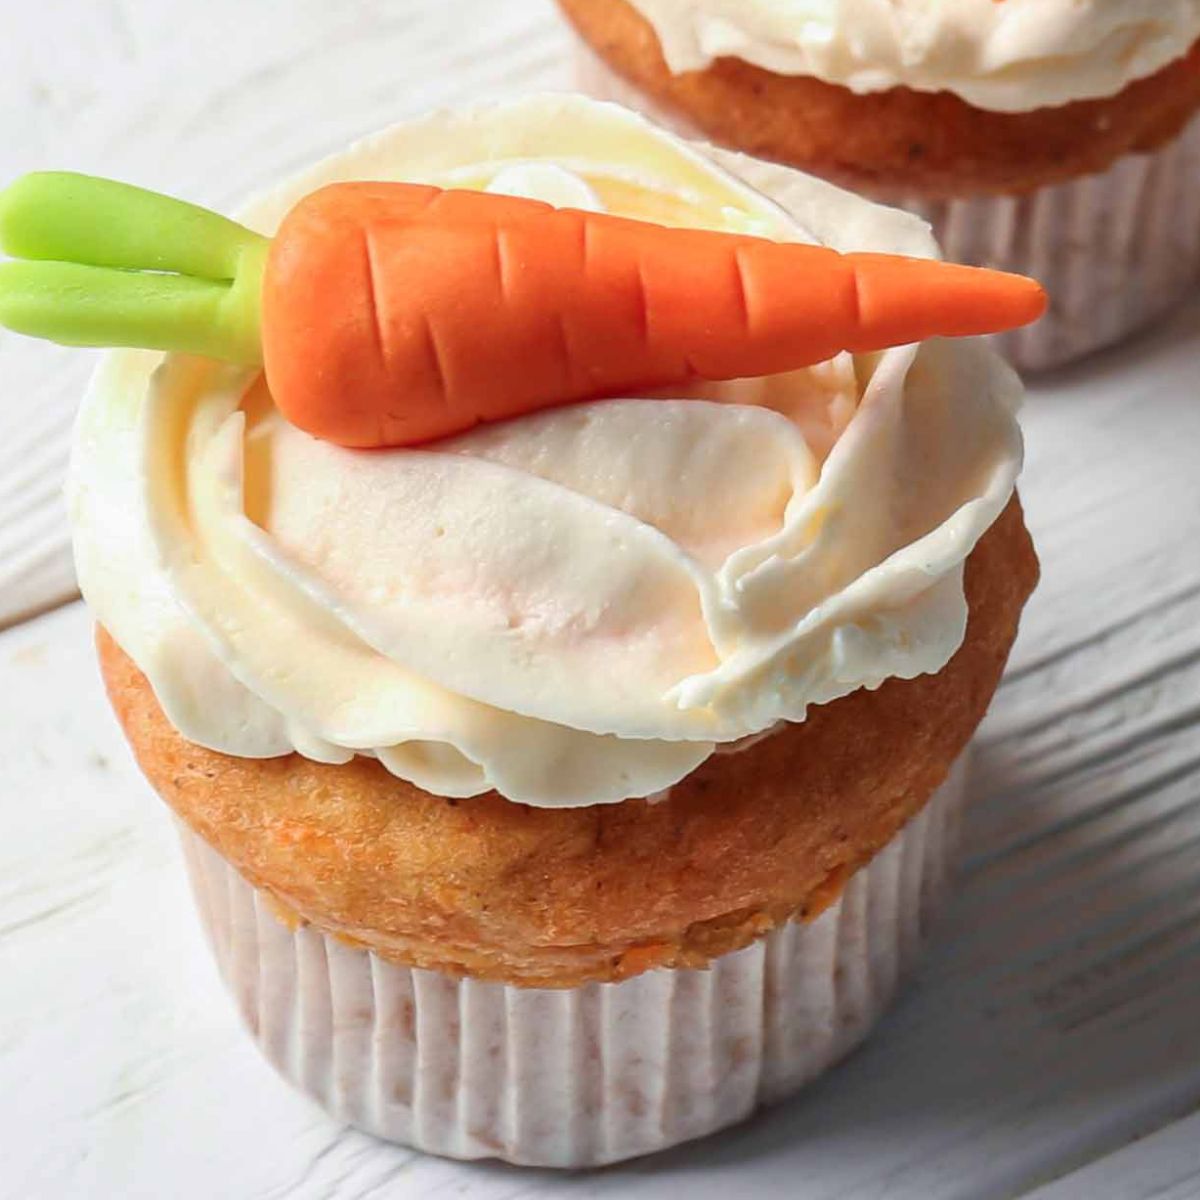 carrot banana muffins with quark frosting topped with a marzipan carrot